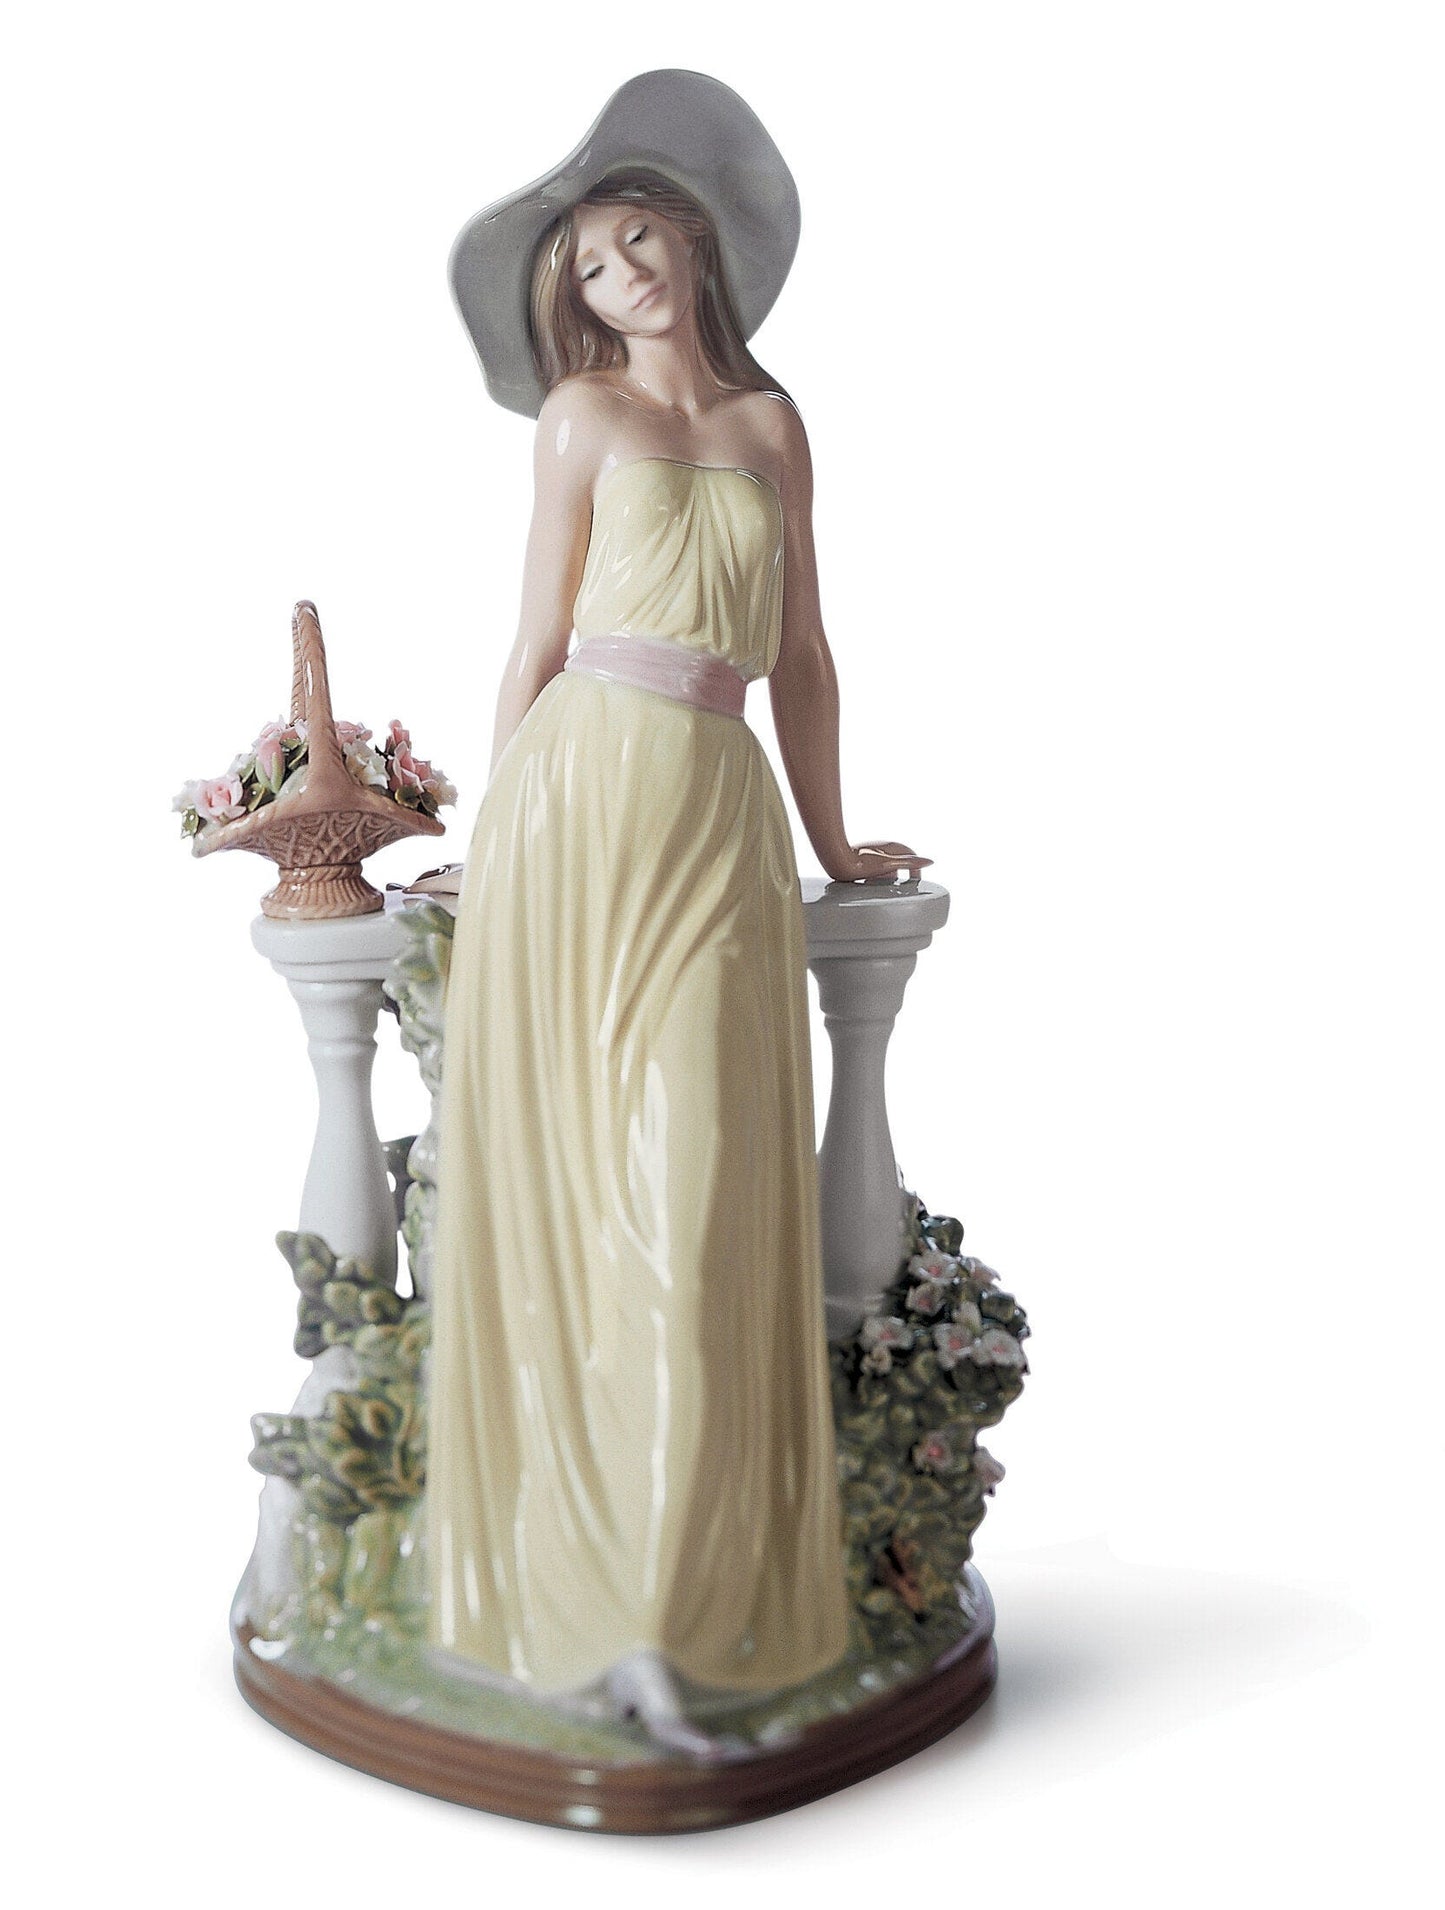 Time for Reflection Woman Figurine - FormFluent